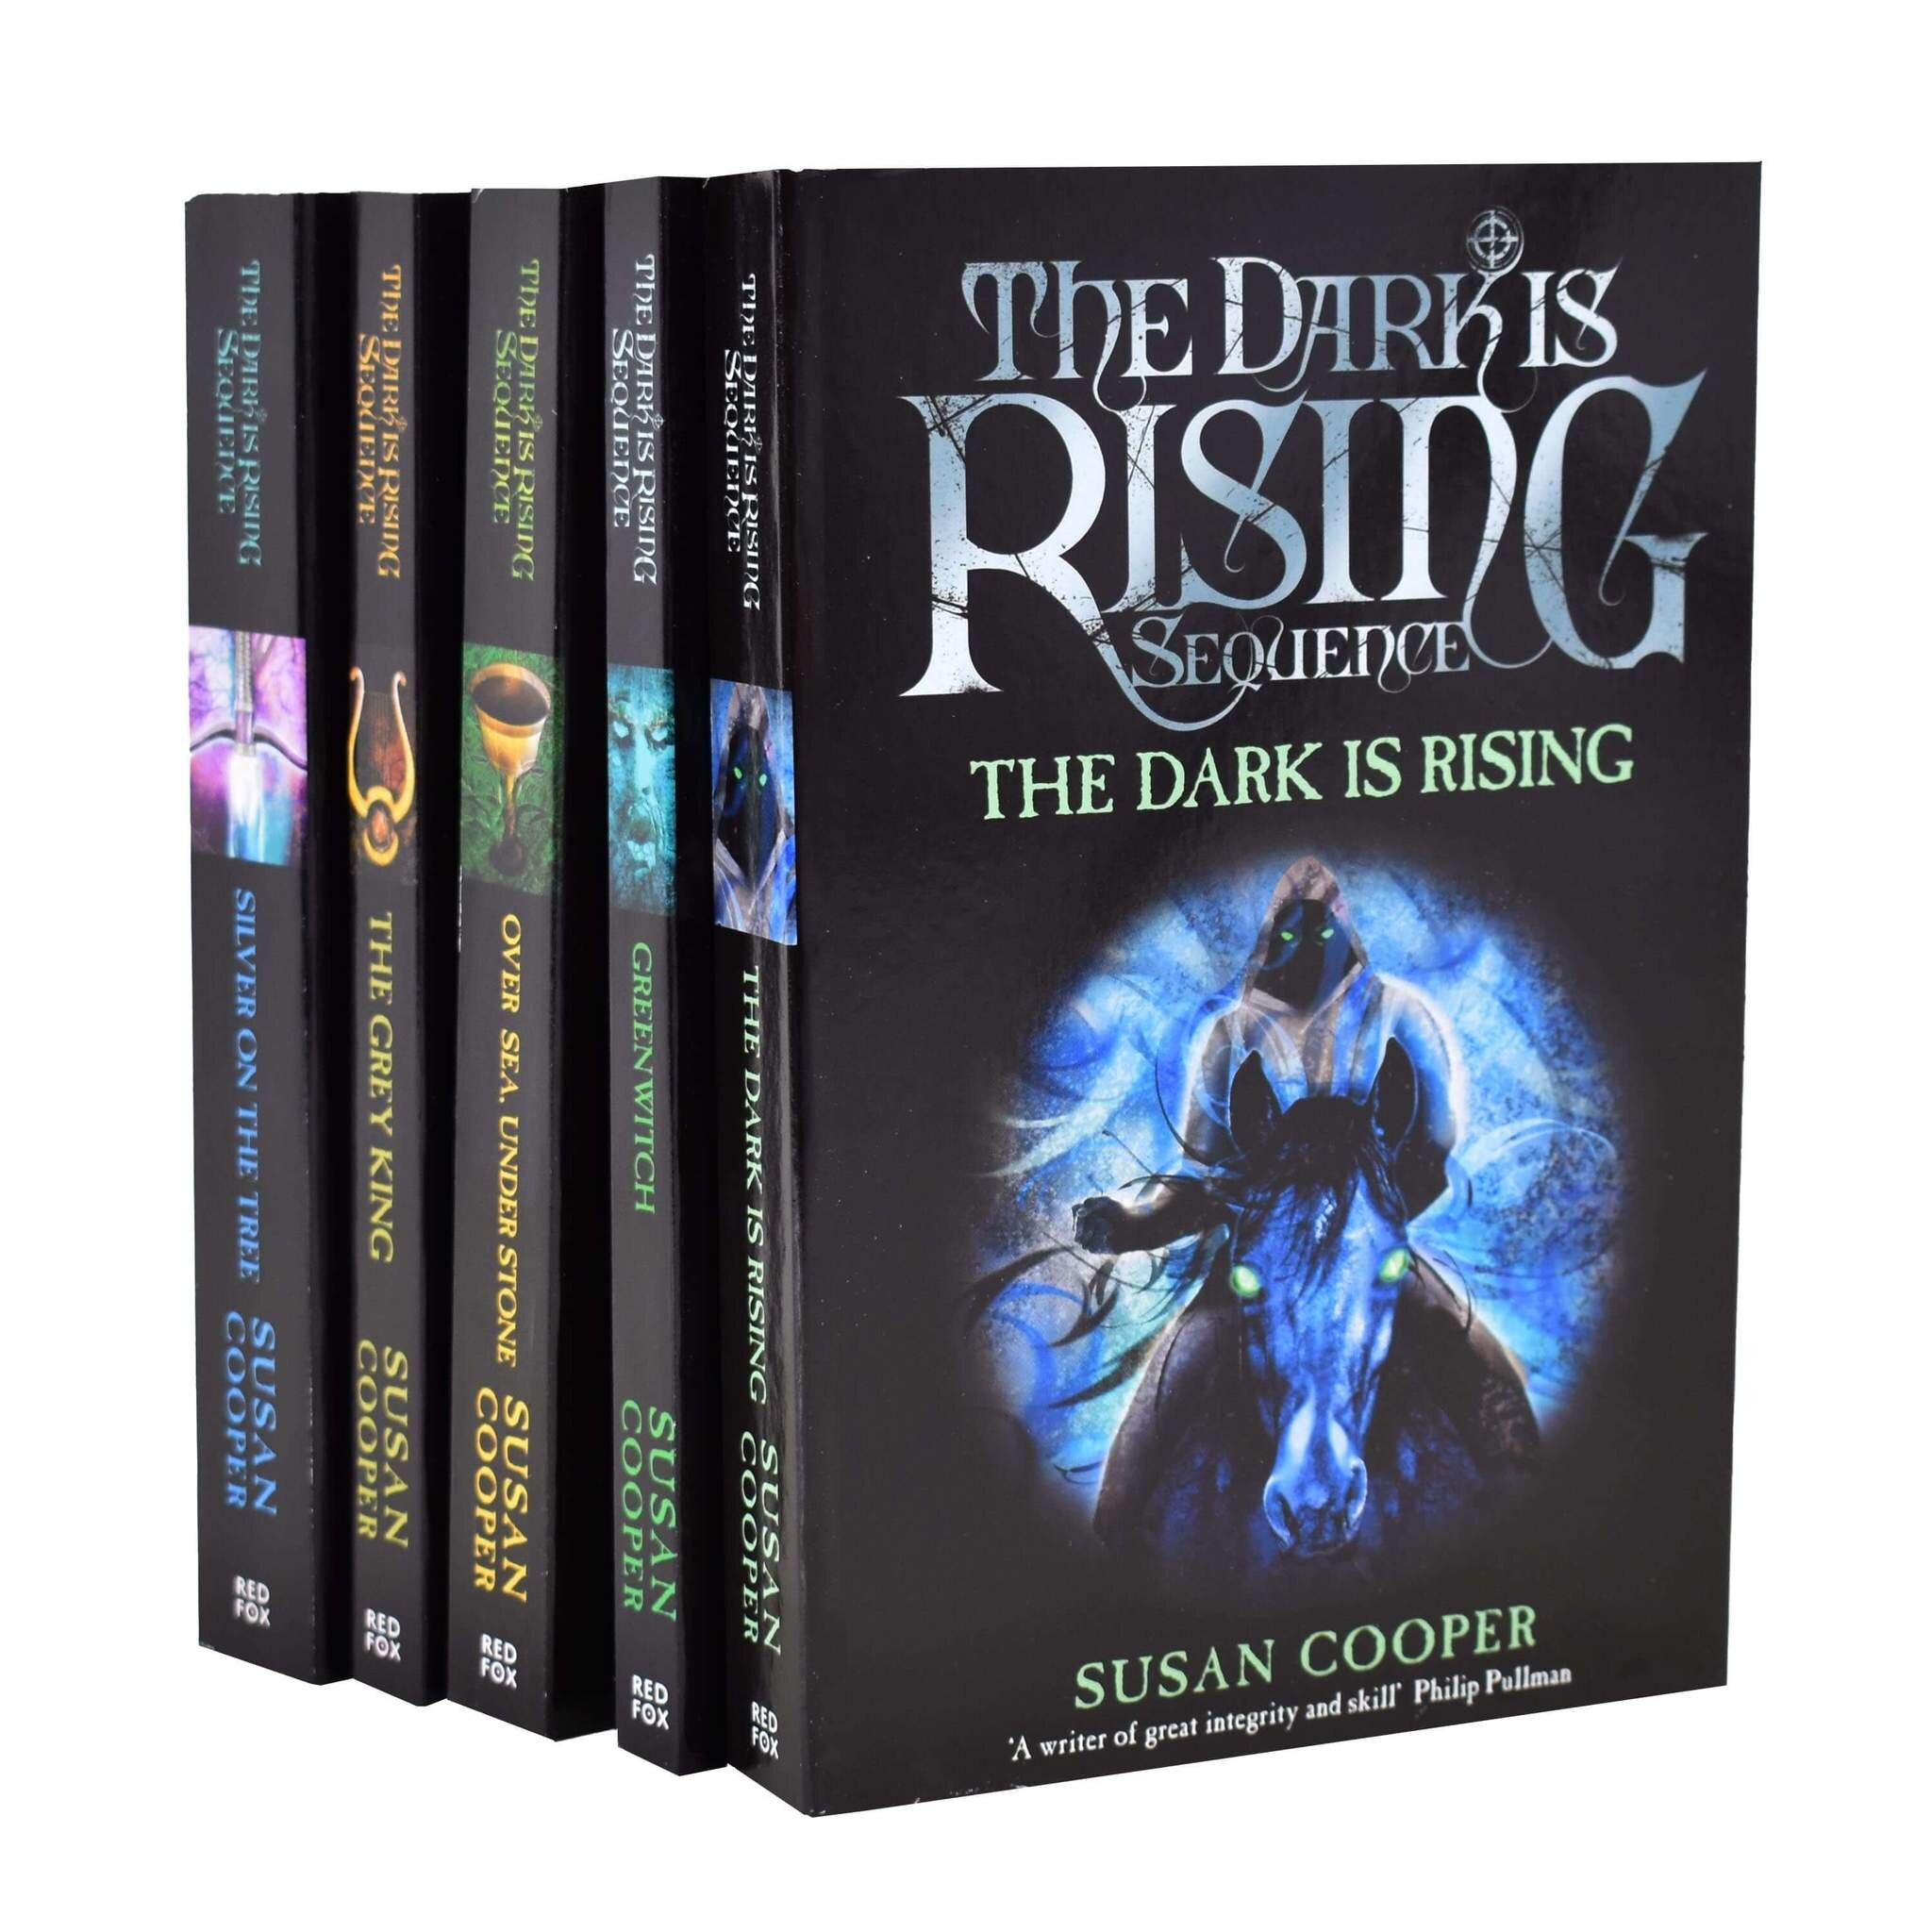 age-9-14-the-dark-is-rising-sequence-collection-5-books-set-by-susan-cooper-ages-9-14-paperback-1_.jpg